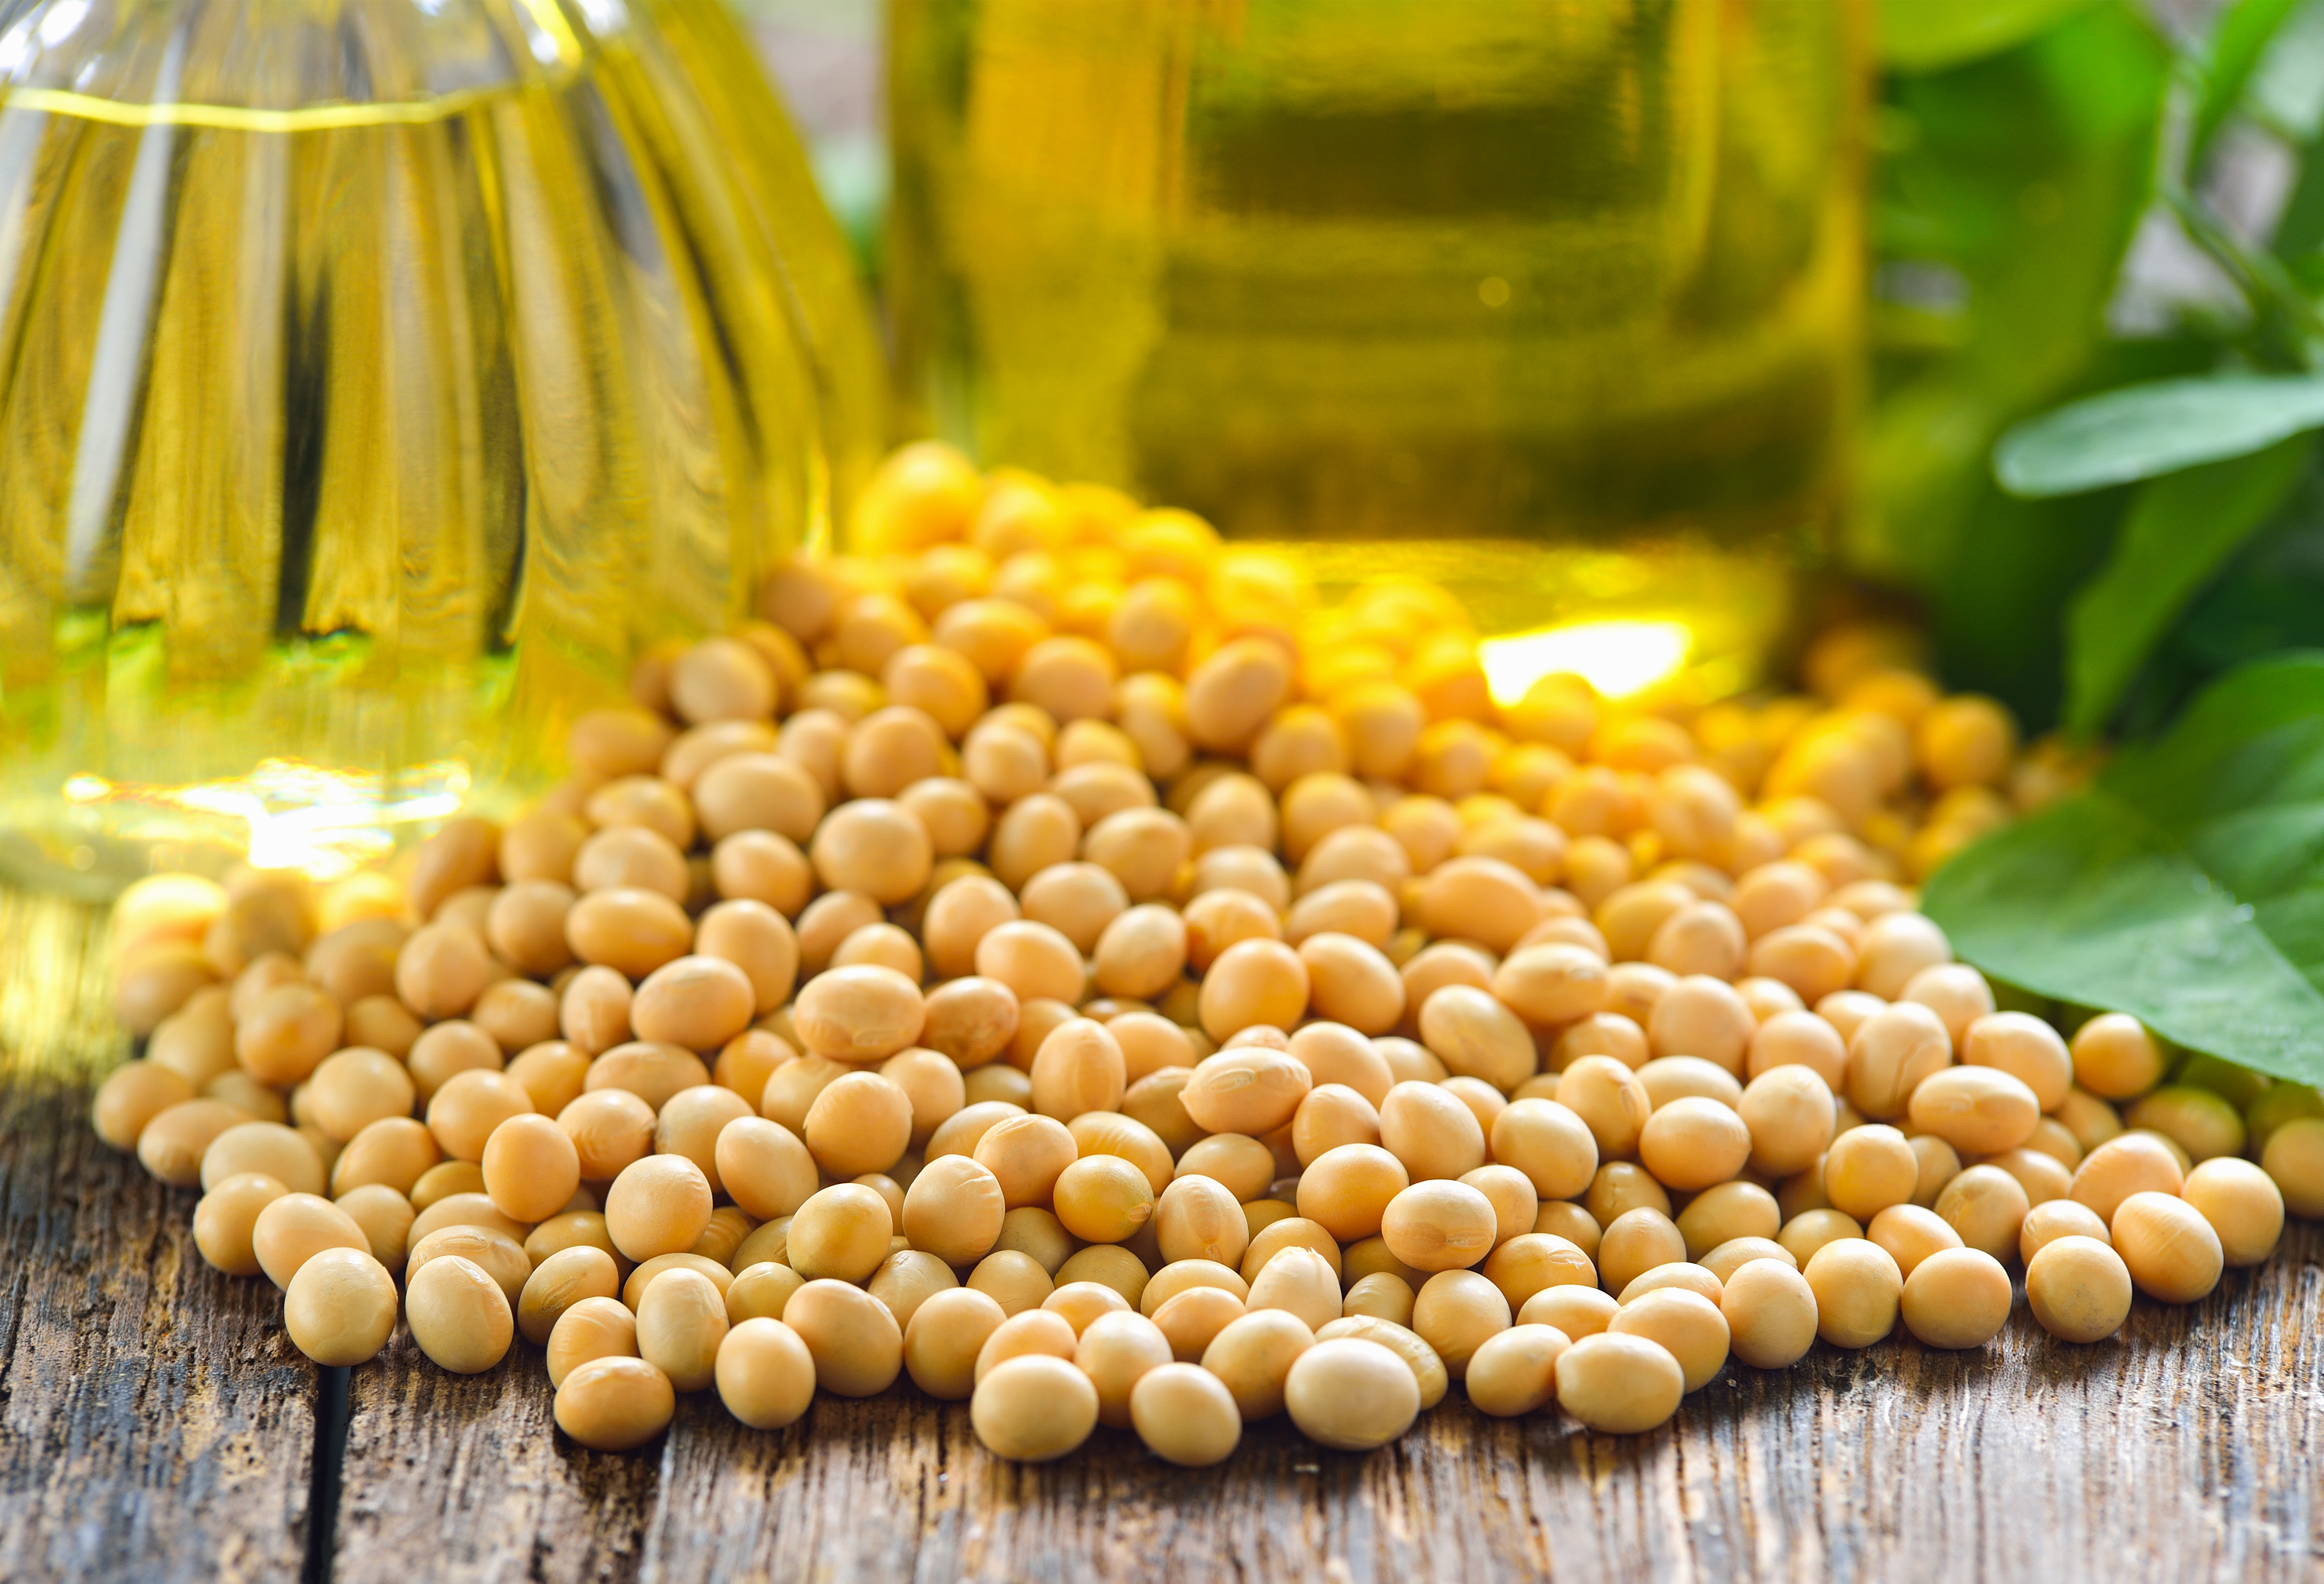 Is Soybean Oil Bad For You?